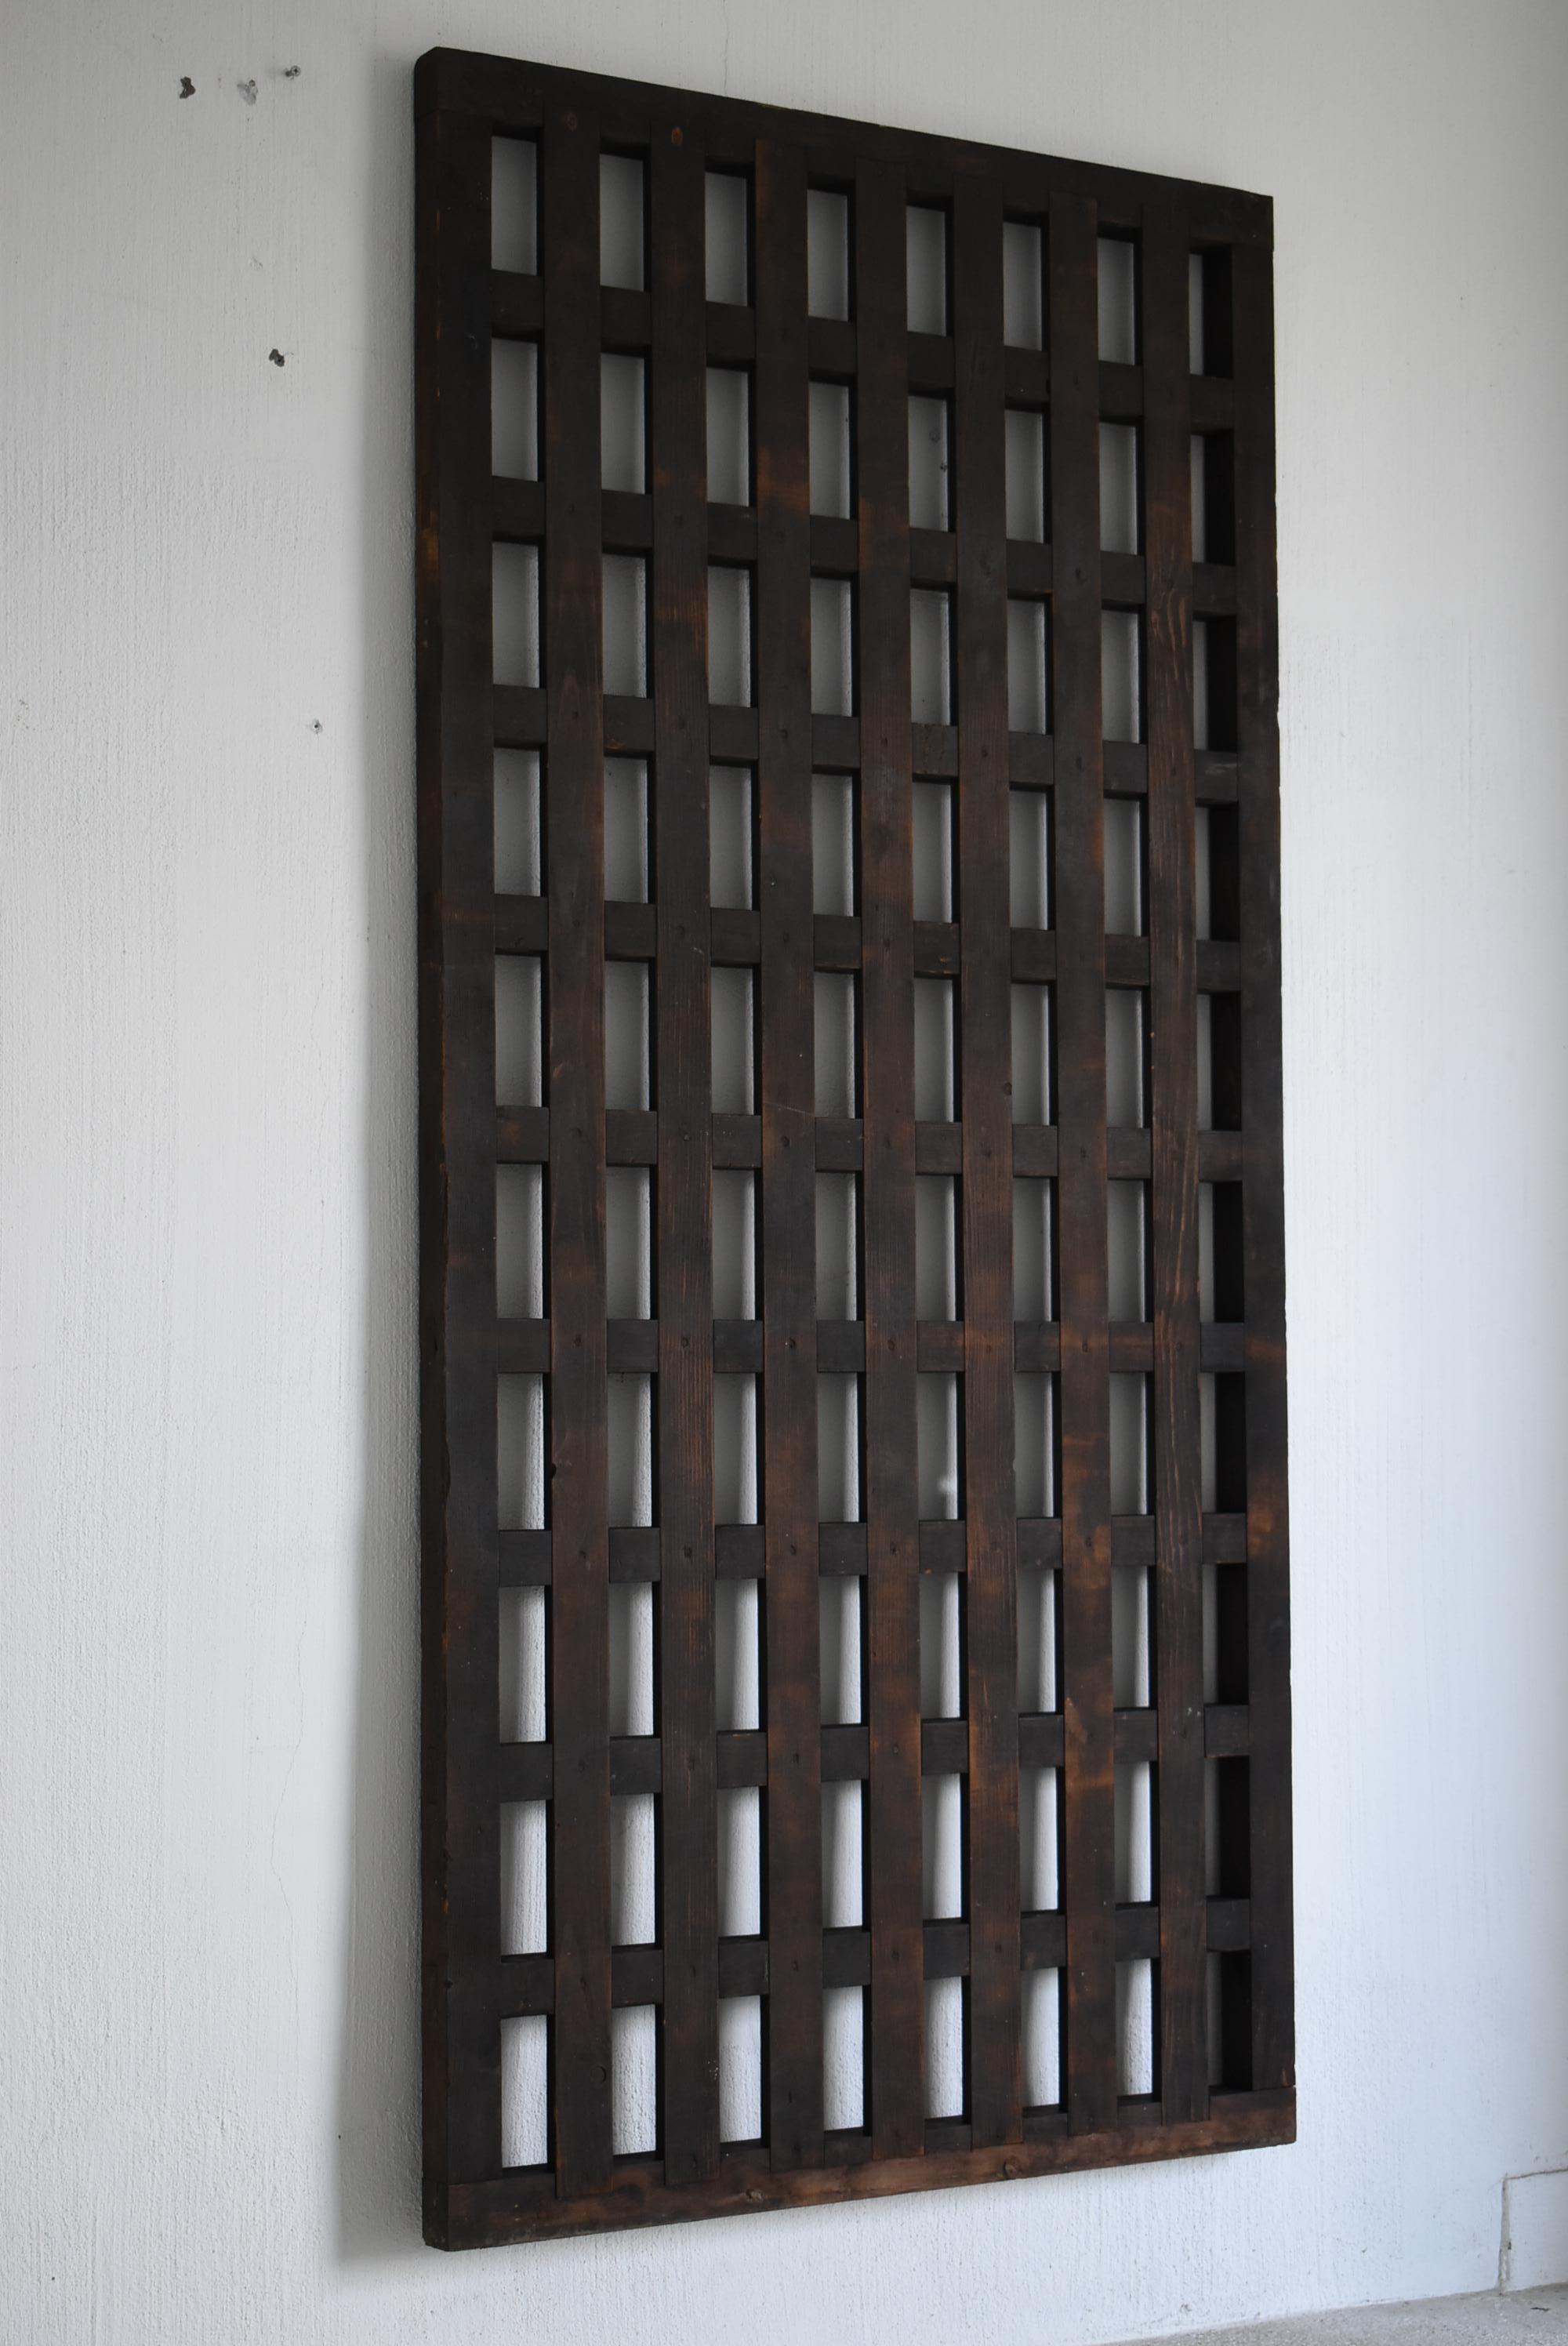 This is a very old Japanese sliding lattice door.
This item dates from the Meiji period (1860s-1900s).
It is made of cedar wood.

It is elaborately made in the shape of a lattice.
You can feel the Japanese craftsmanship.

It is in very good